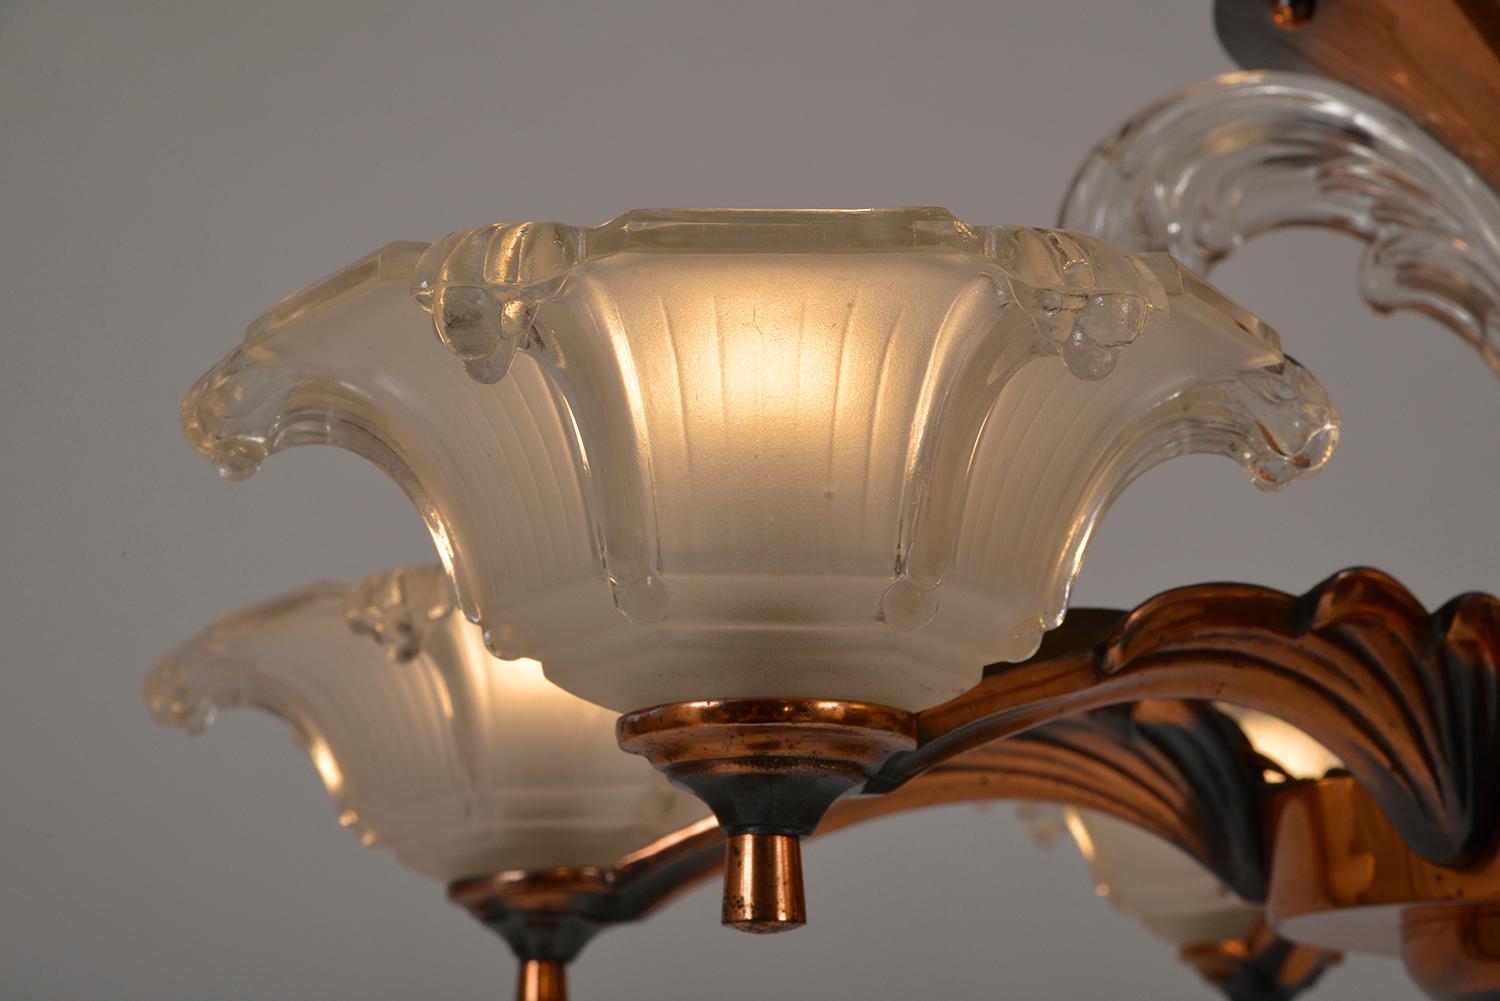 1930s French Art Deco 6-Arm Chandelier by Petitot and Ezan Copper and Glass For Sale 9